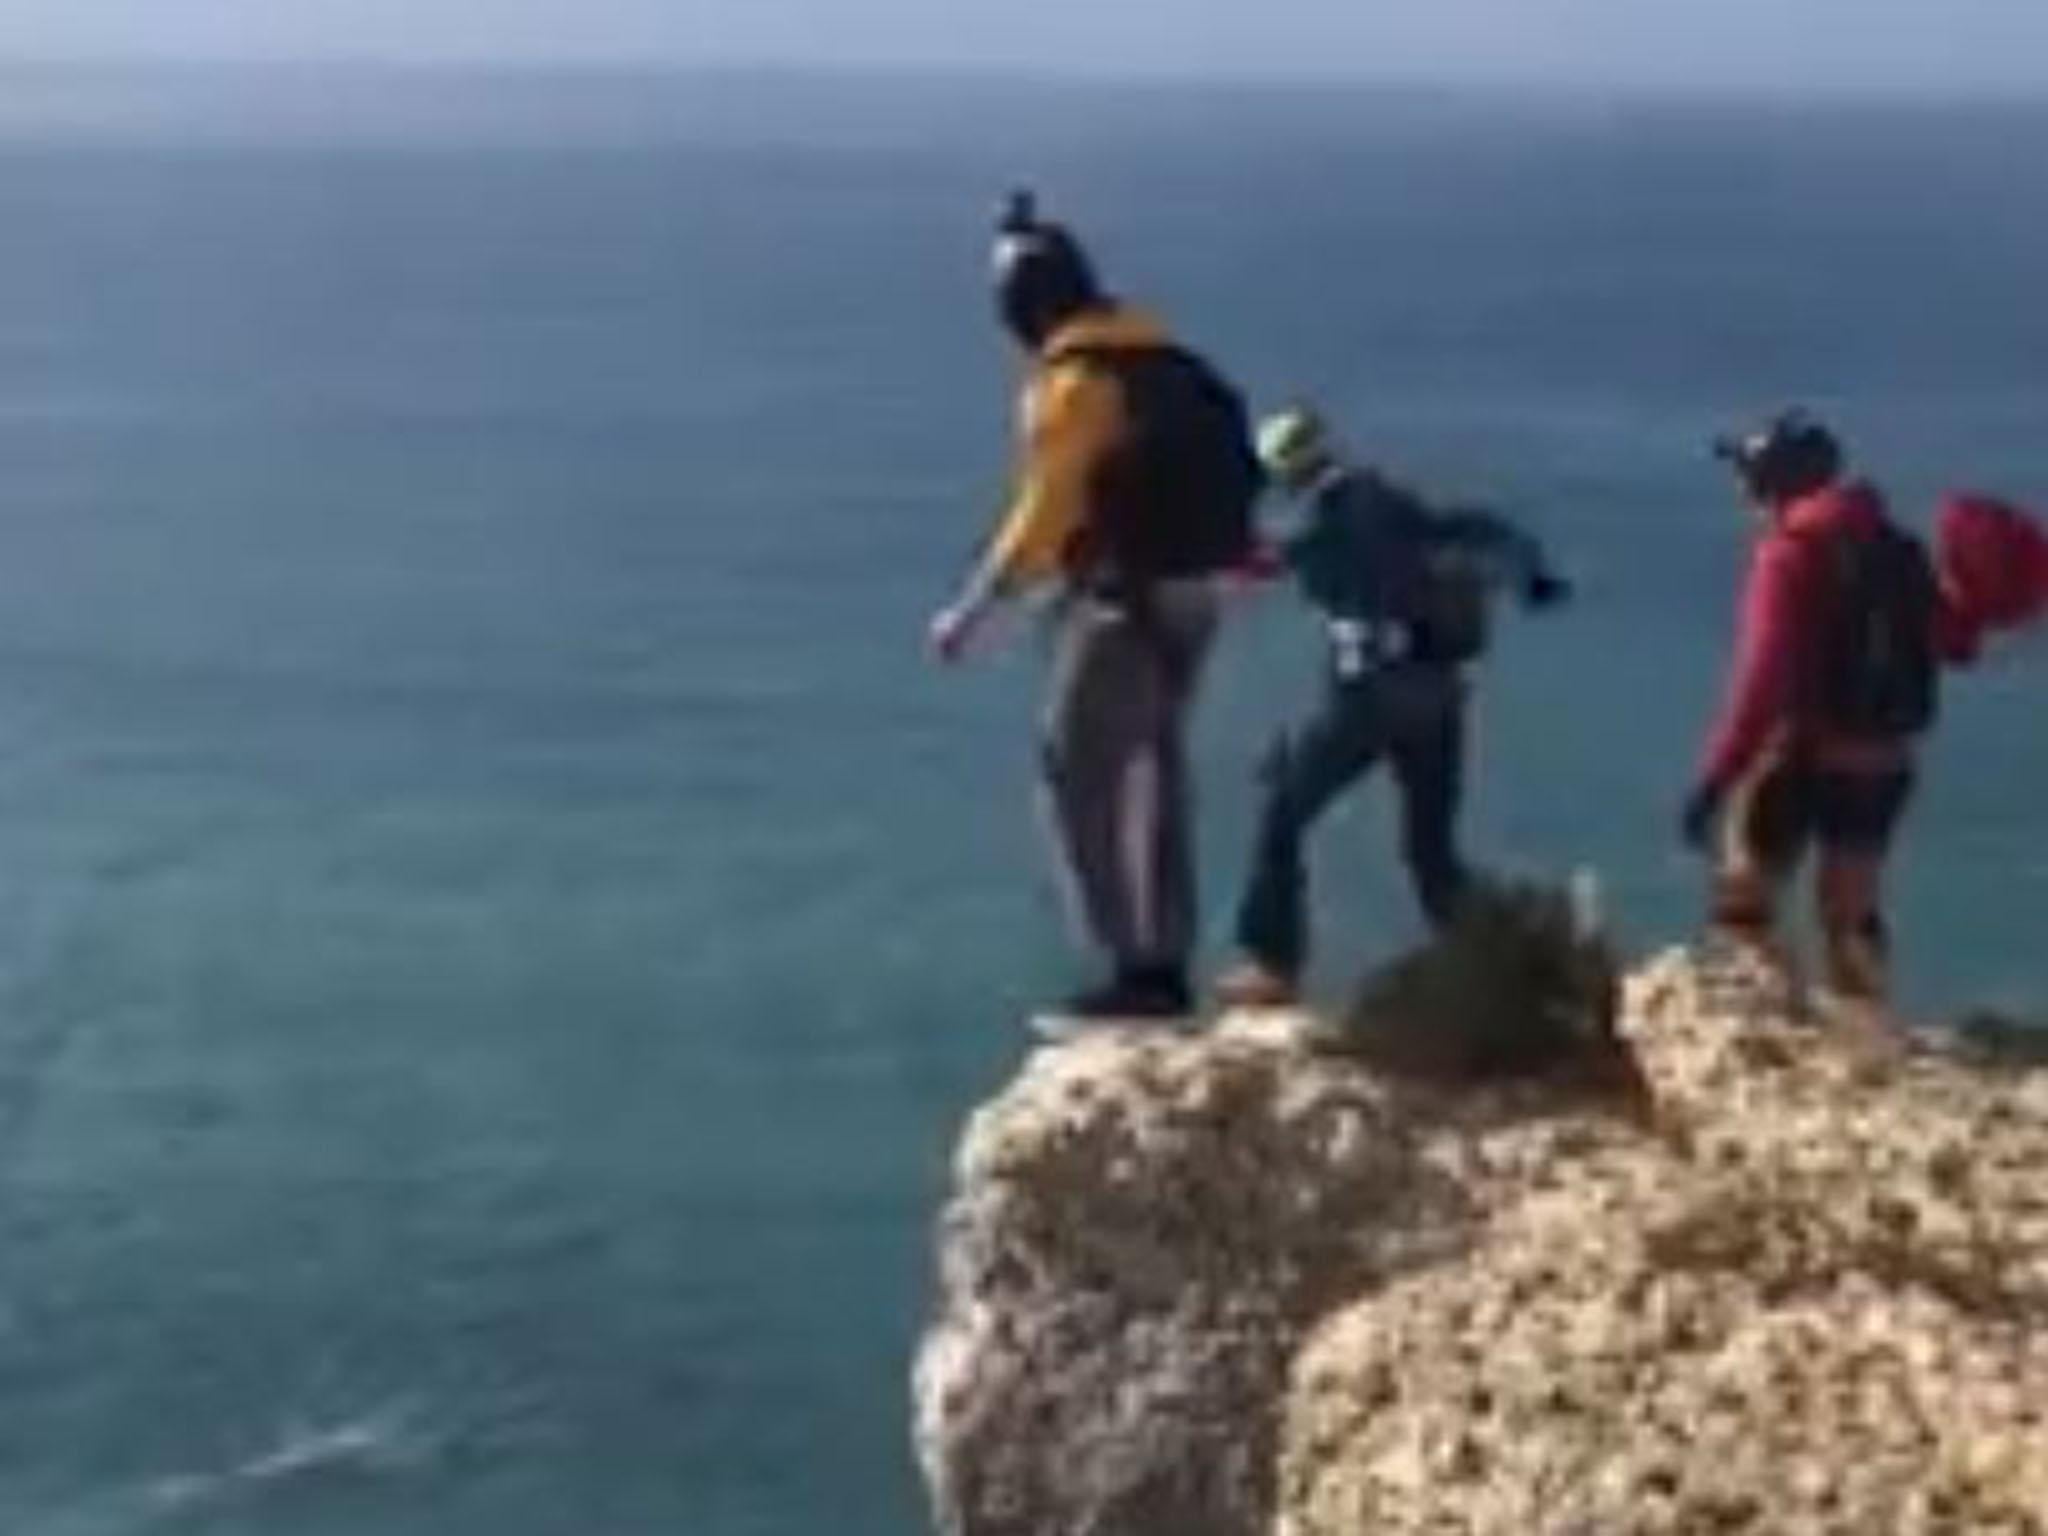 Dominic Loyen (centre, in blue) seconds before his fatal jump